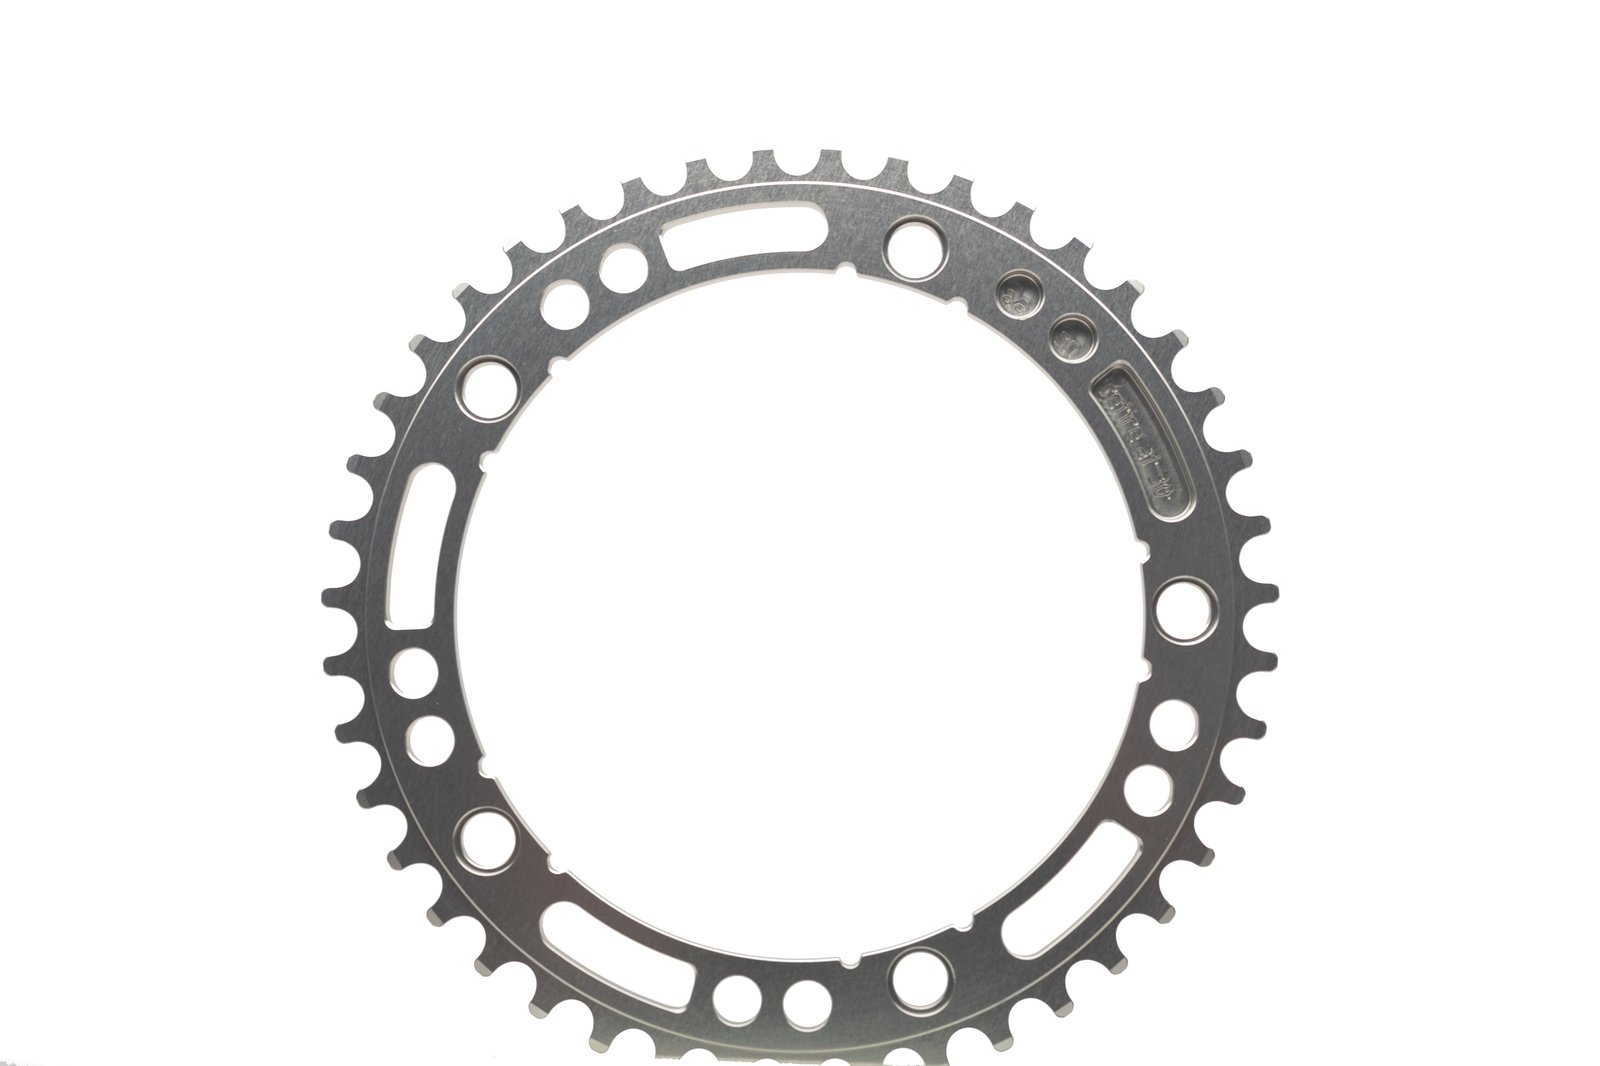 144#43 Tracklocross / Old Knees Track Chainring (144BCD//43-Tooth)